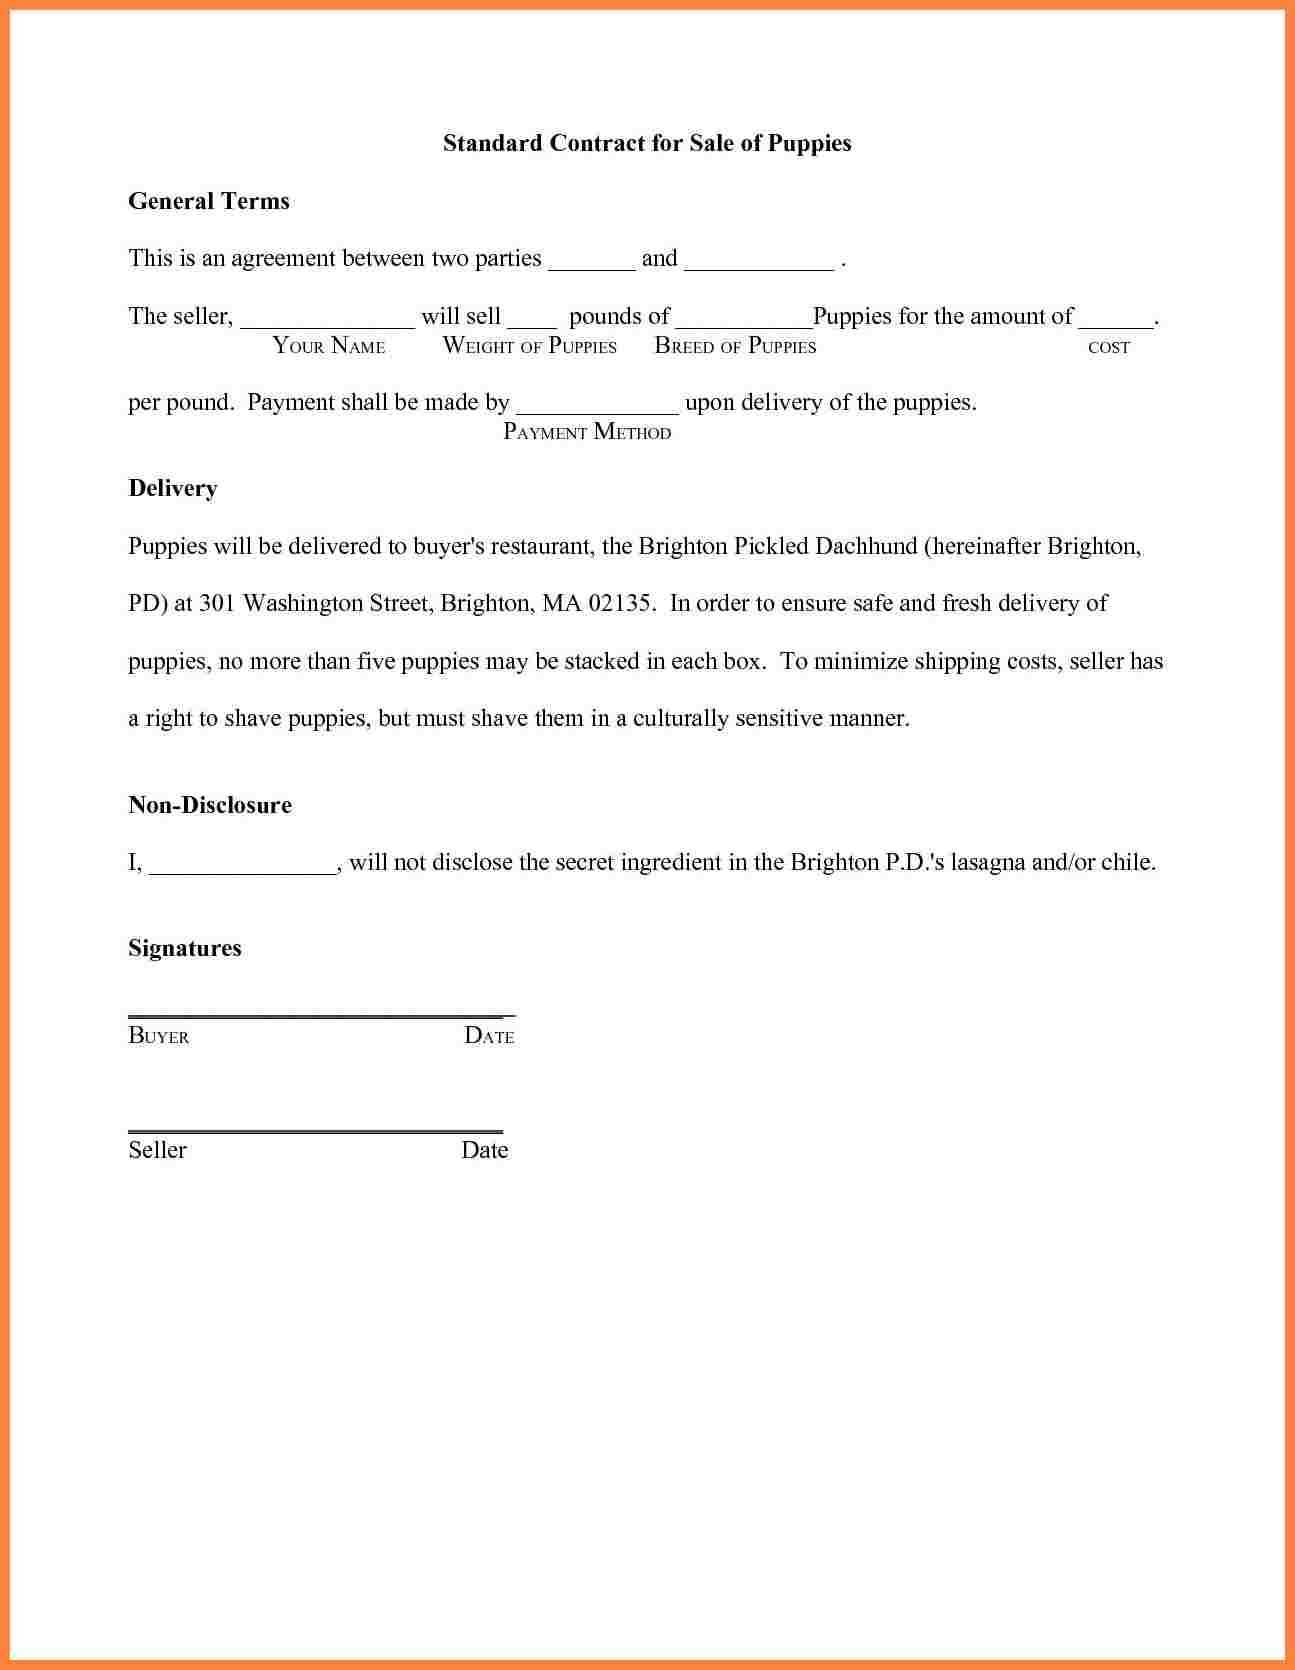 How To Write A Loan Agreement Investment Loan Agreement Template 114930 Simple Loan Agreement